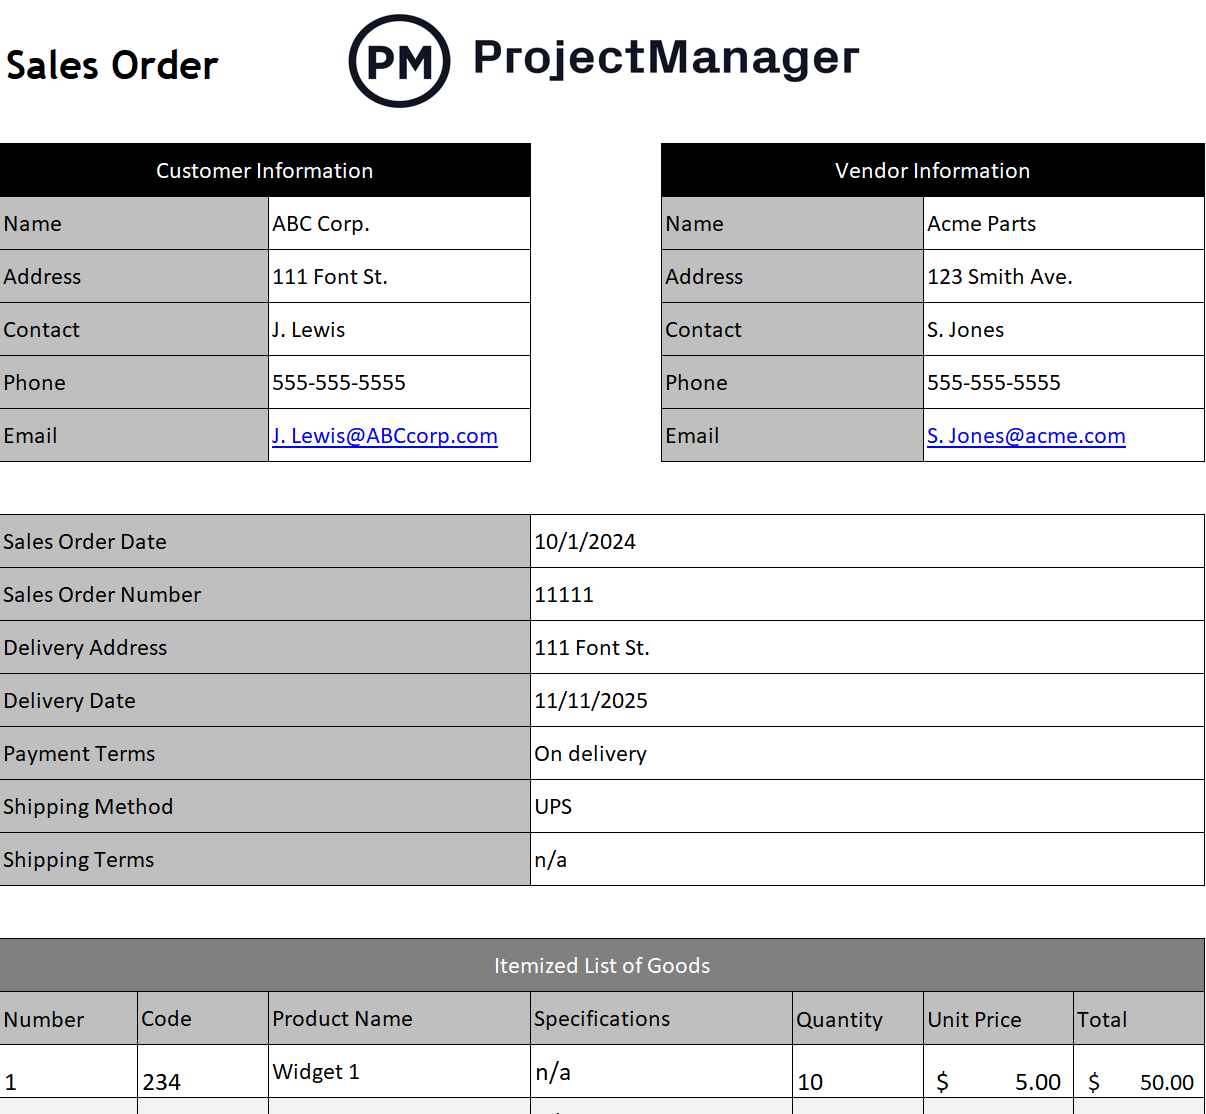 Free sales order template for Excel by ProjectManager